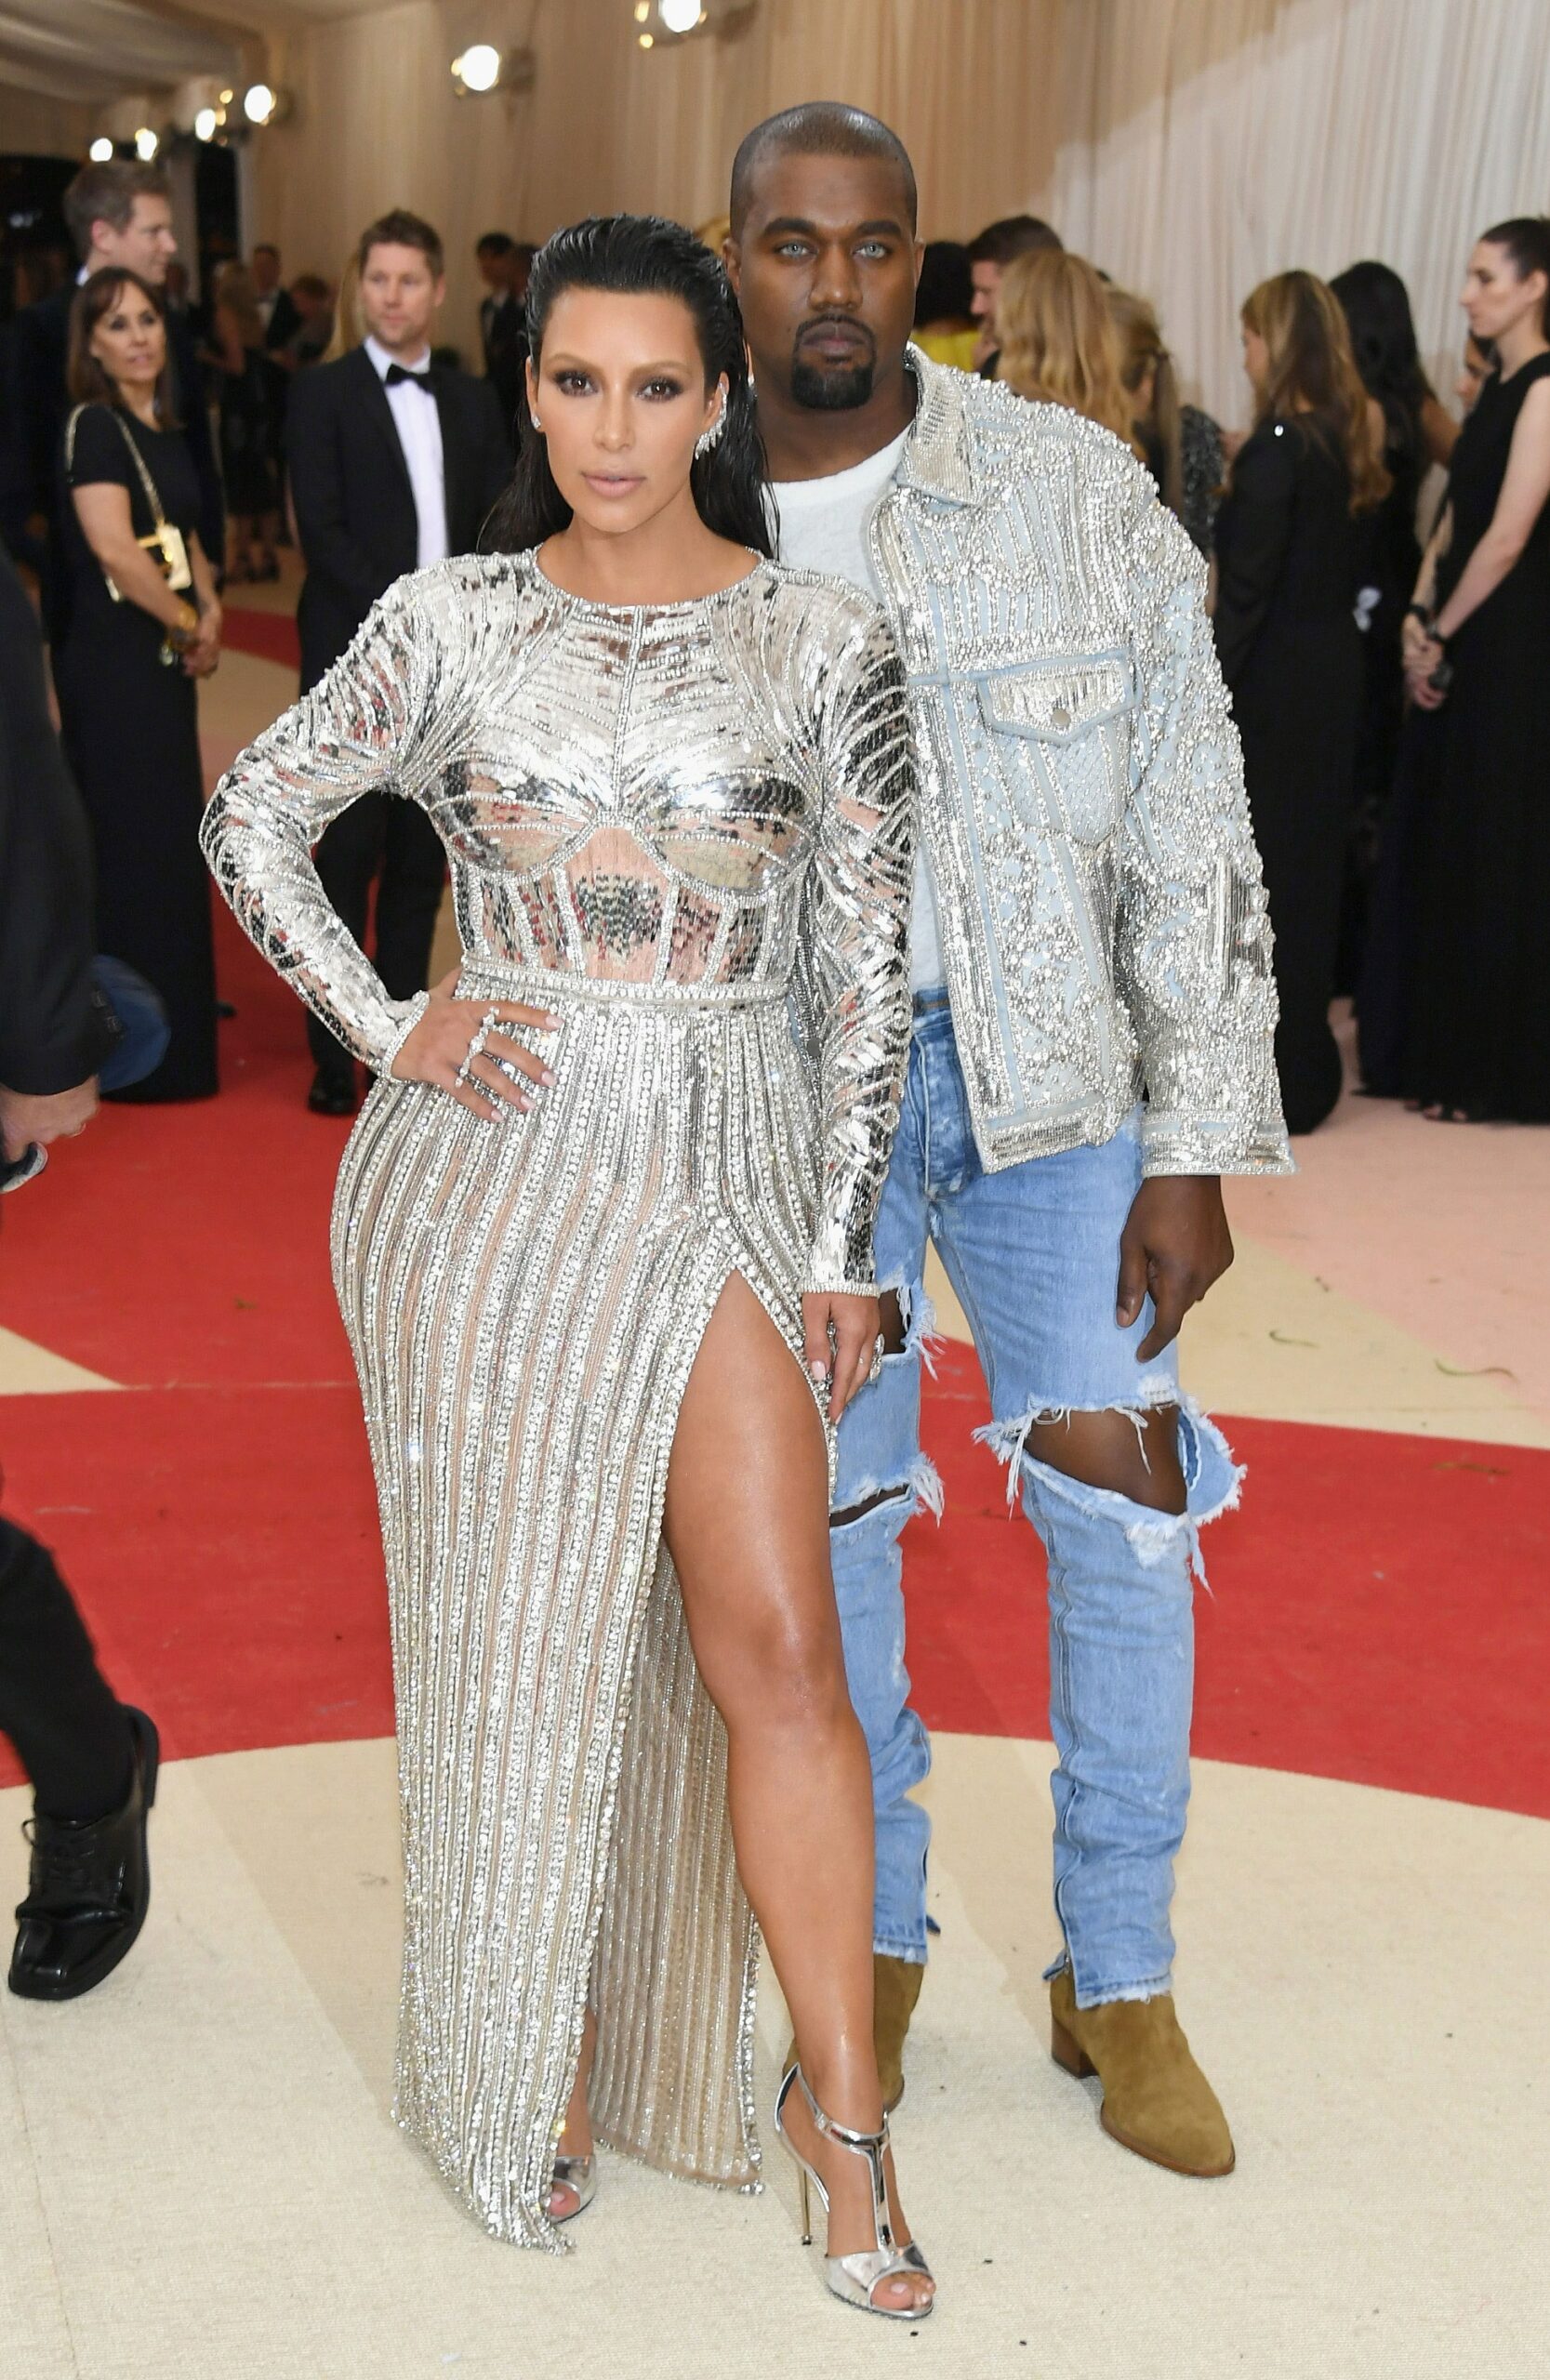 Breaking Down The Met Gala: How Often Does This Star-Studded Event Happen?